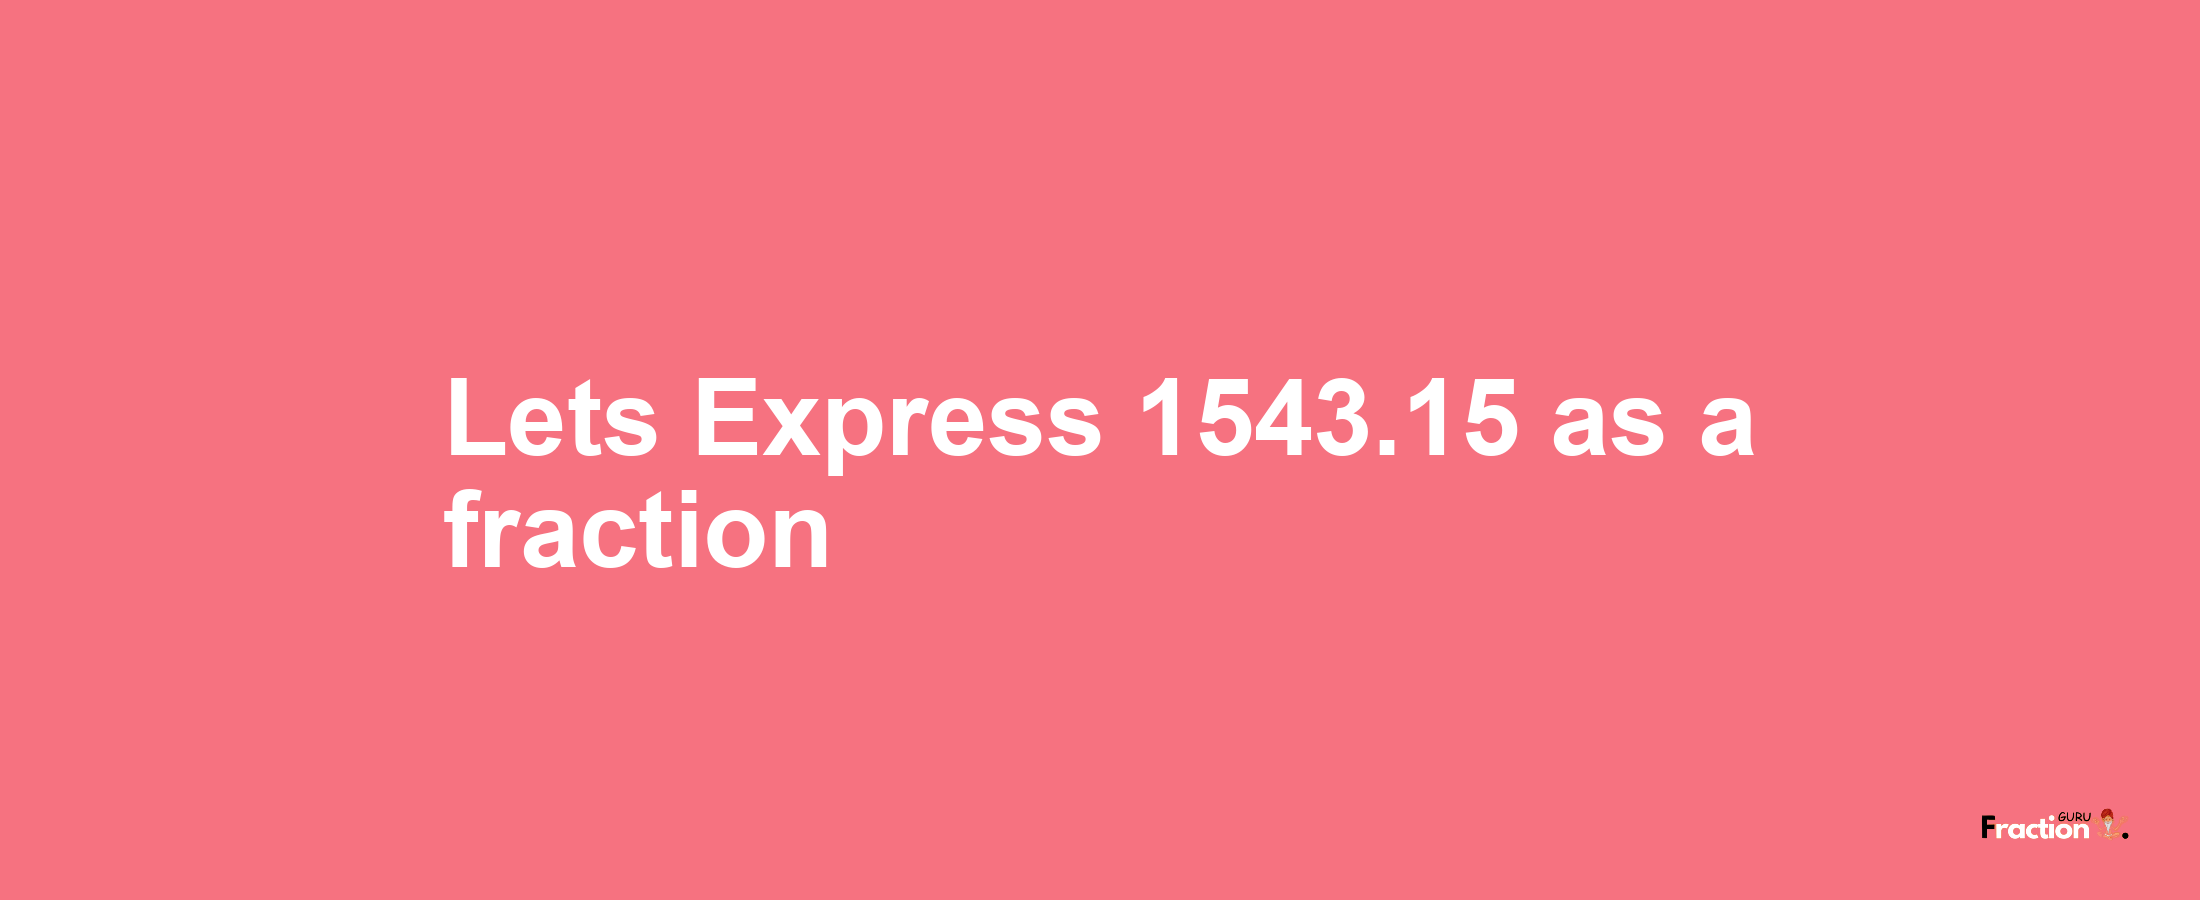 Lets Express 1543.15 as afraction